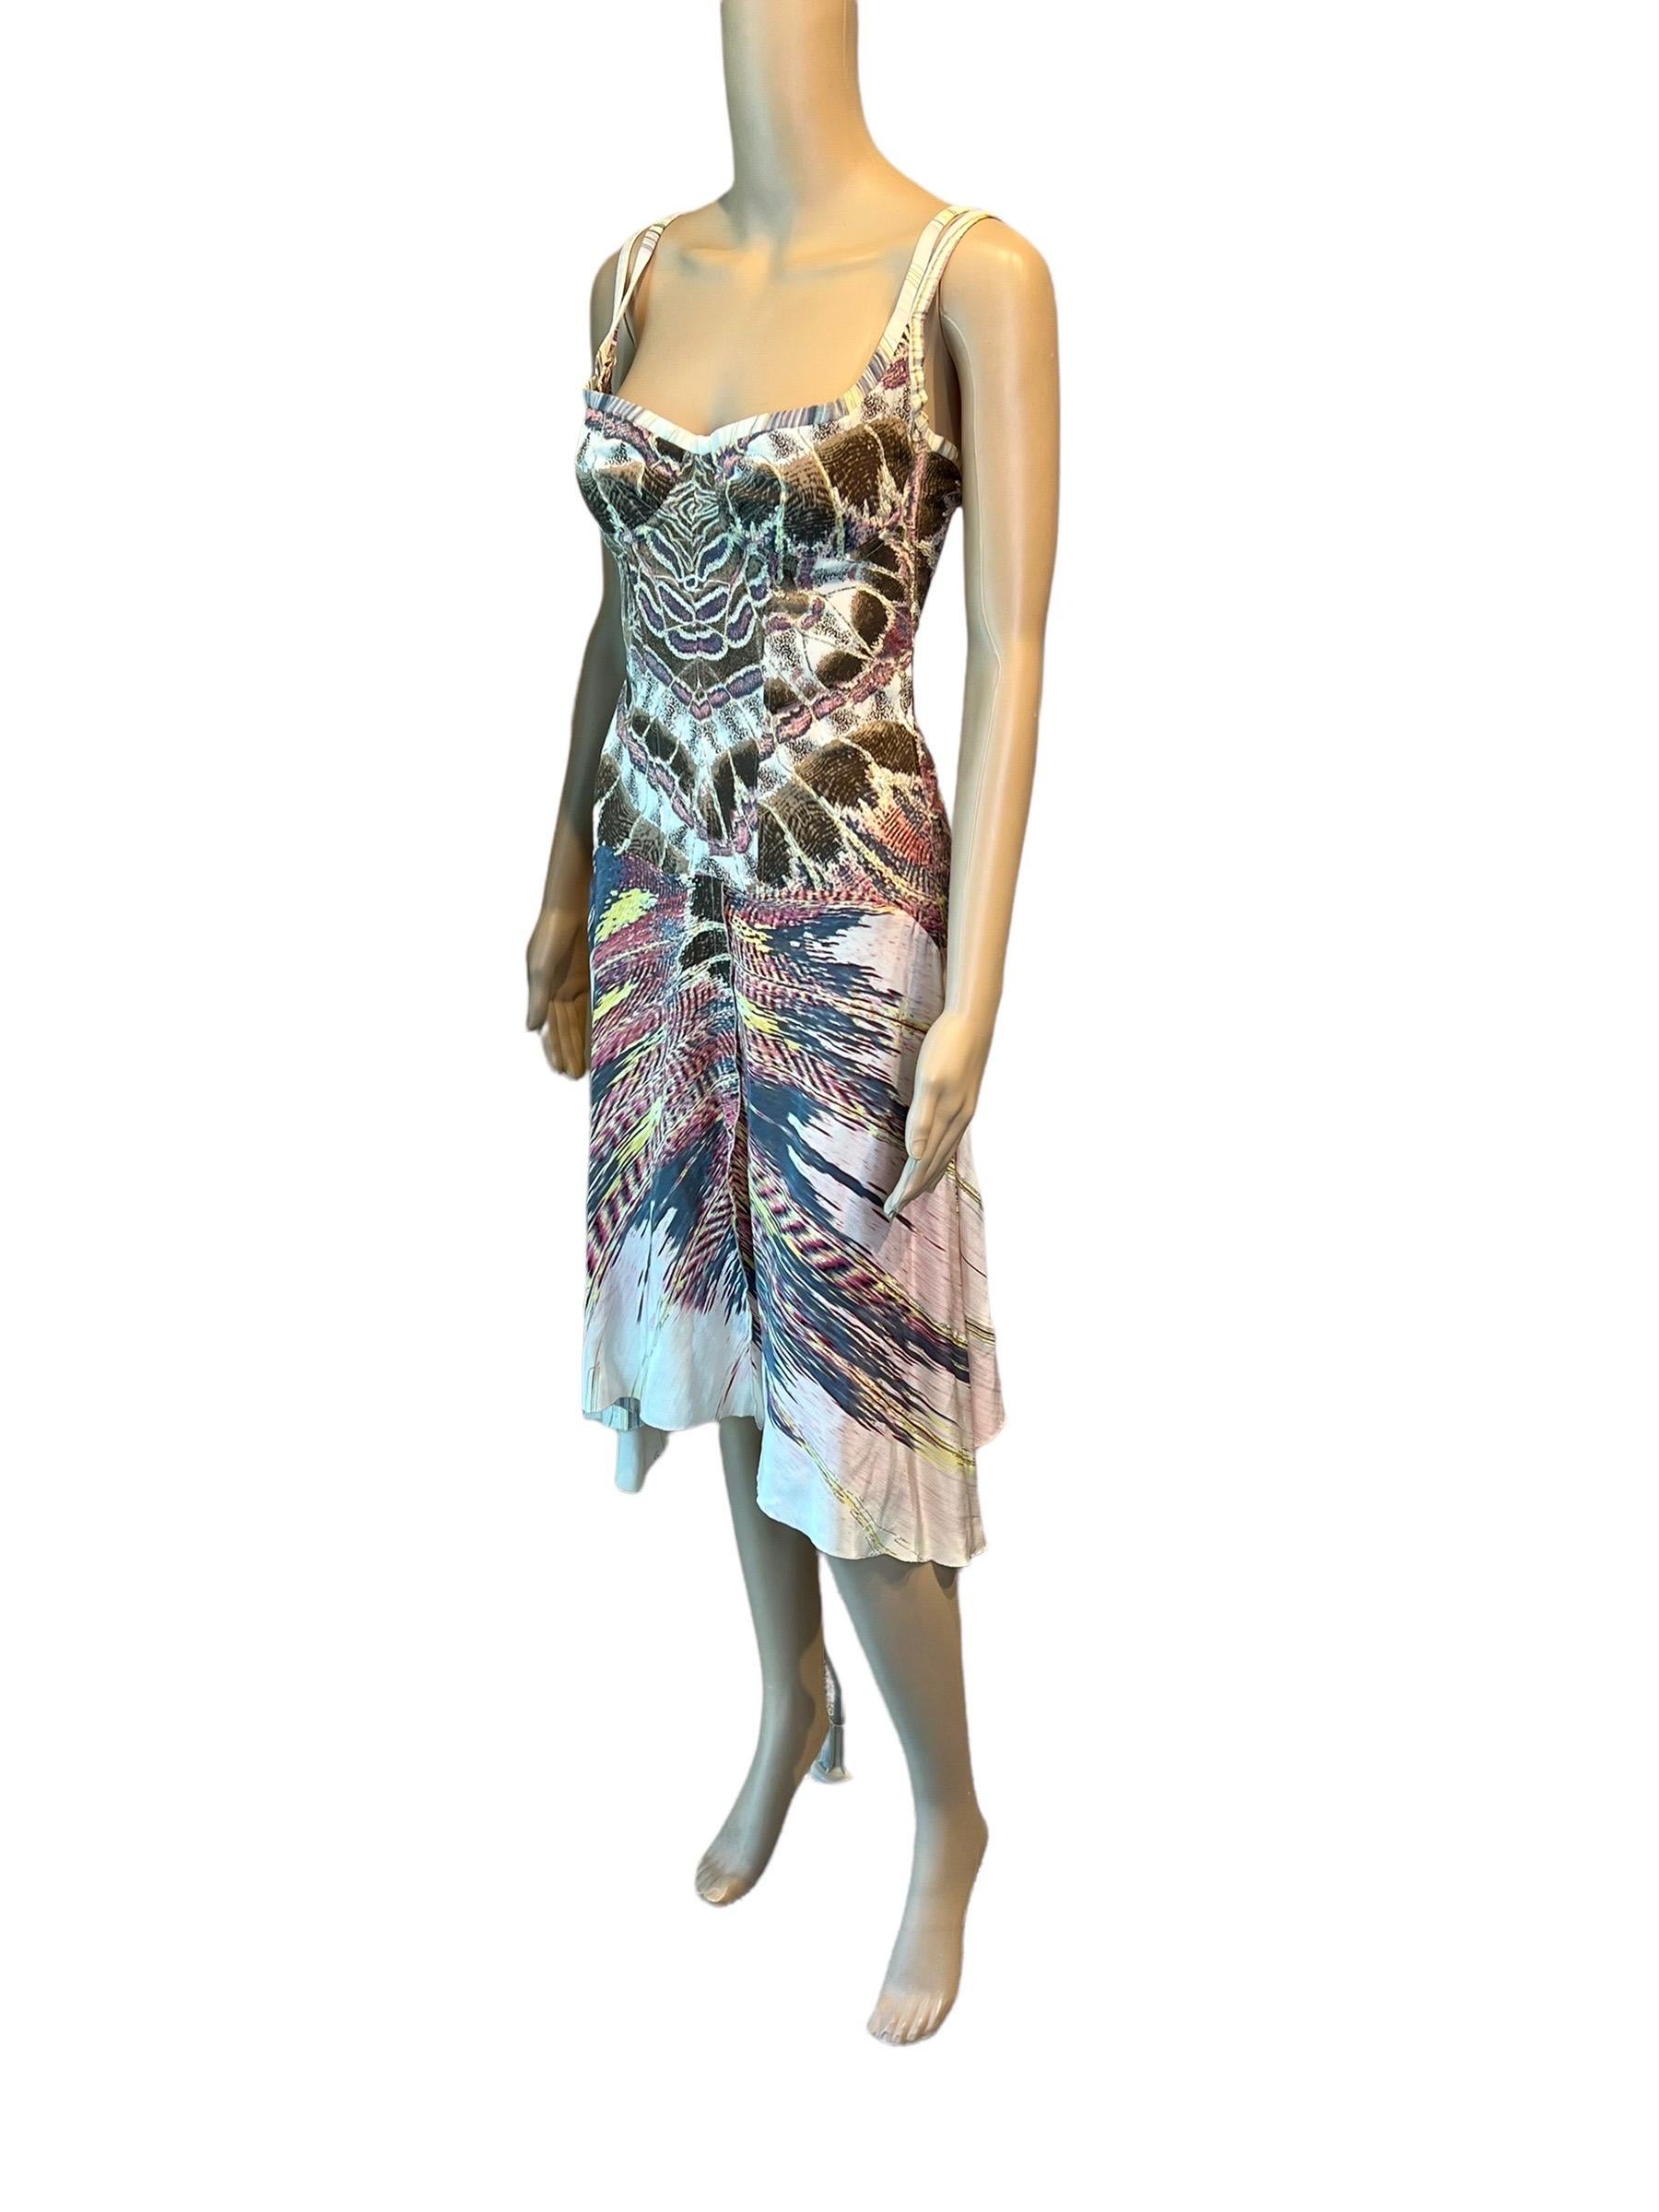 Gray Roberto Cavalli S/S 2004 Bustier Corset Plunging Neckline Feather Print Dress For Sale